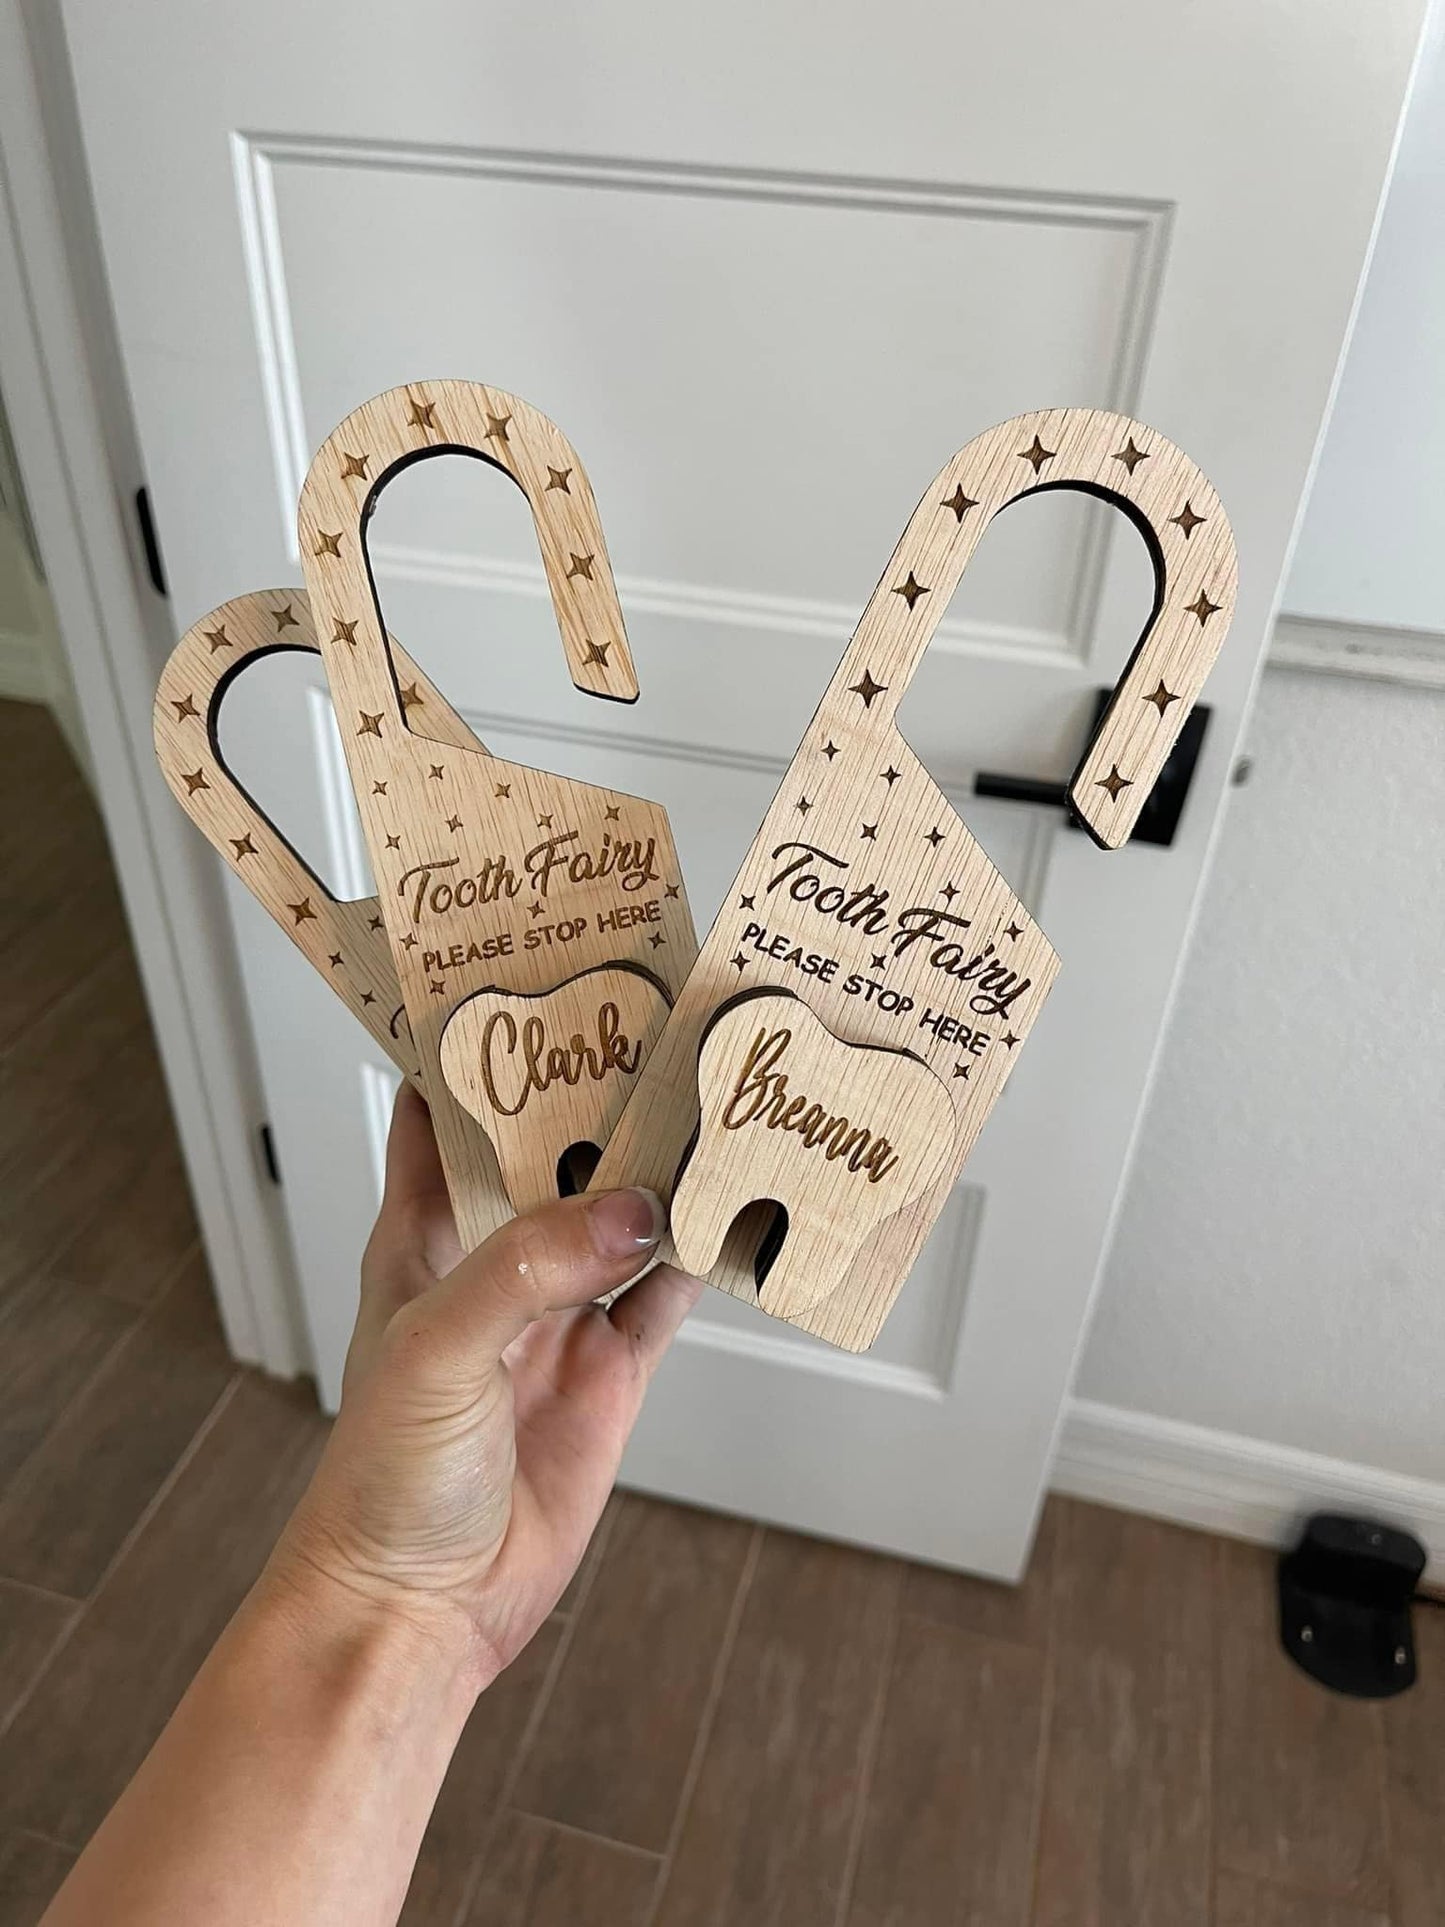 Personalized Tooth Fairy Doorhanger (PREORDER - SHIPS IN 5 WEEKS)